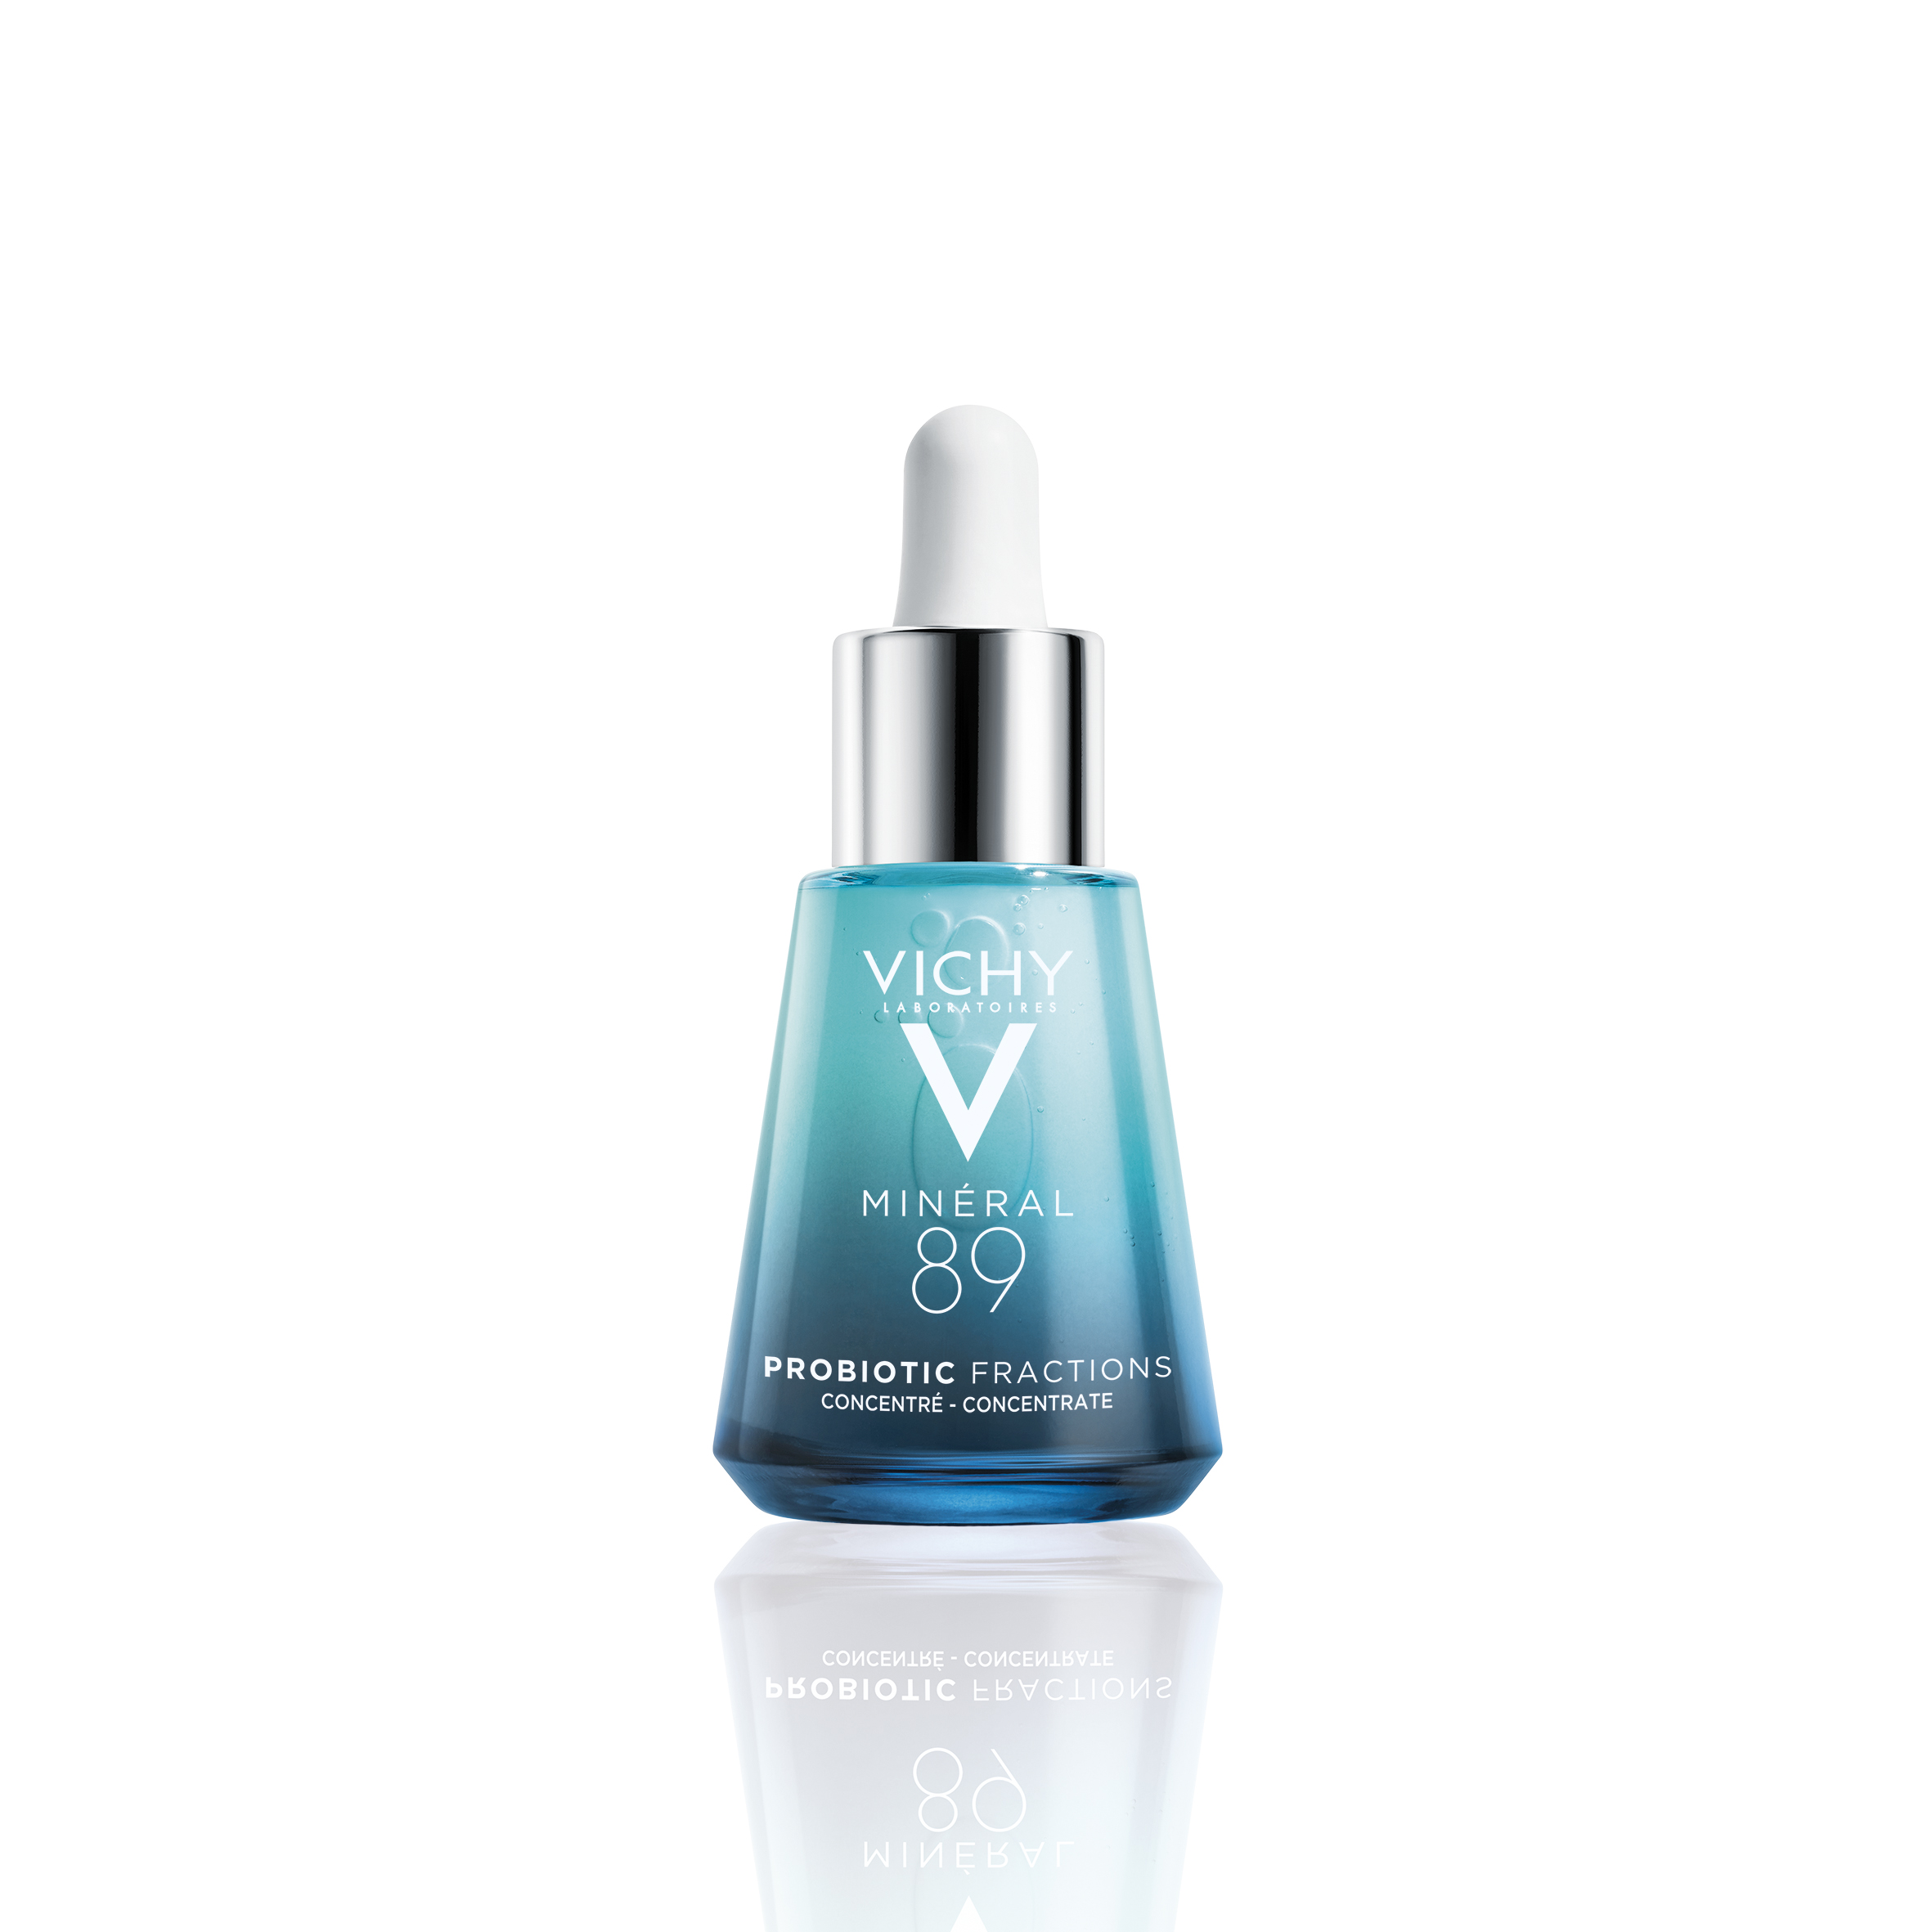 Tinh Chất Vichy Mineral 89 Probiotic Fractions 30ml